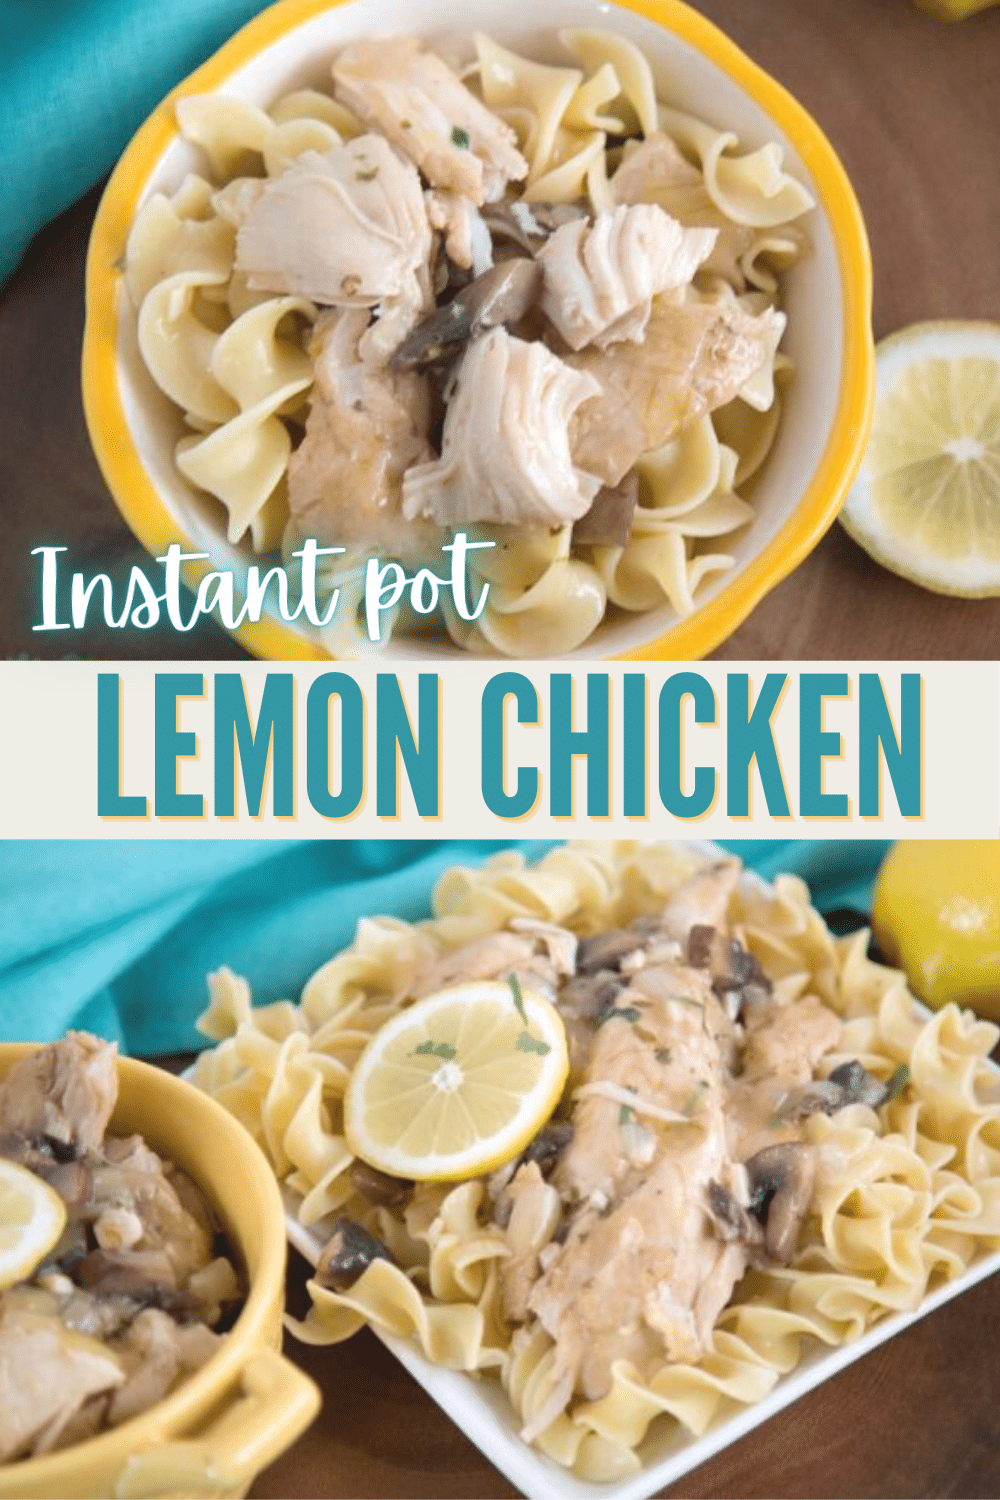 This Instant Pot Lemon Chicken is the perfect family-friendly dinner! Quick, simple, and just the right amount of lemon. #instantpot #pressurecooker #lemon #chicken #easydinner #wondermomwannabe via @wondermomwannab